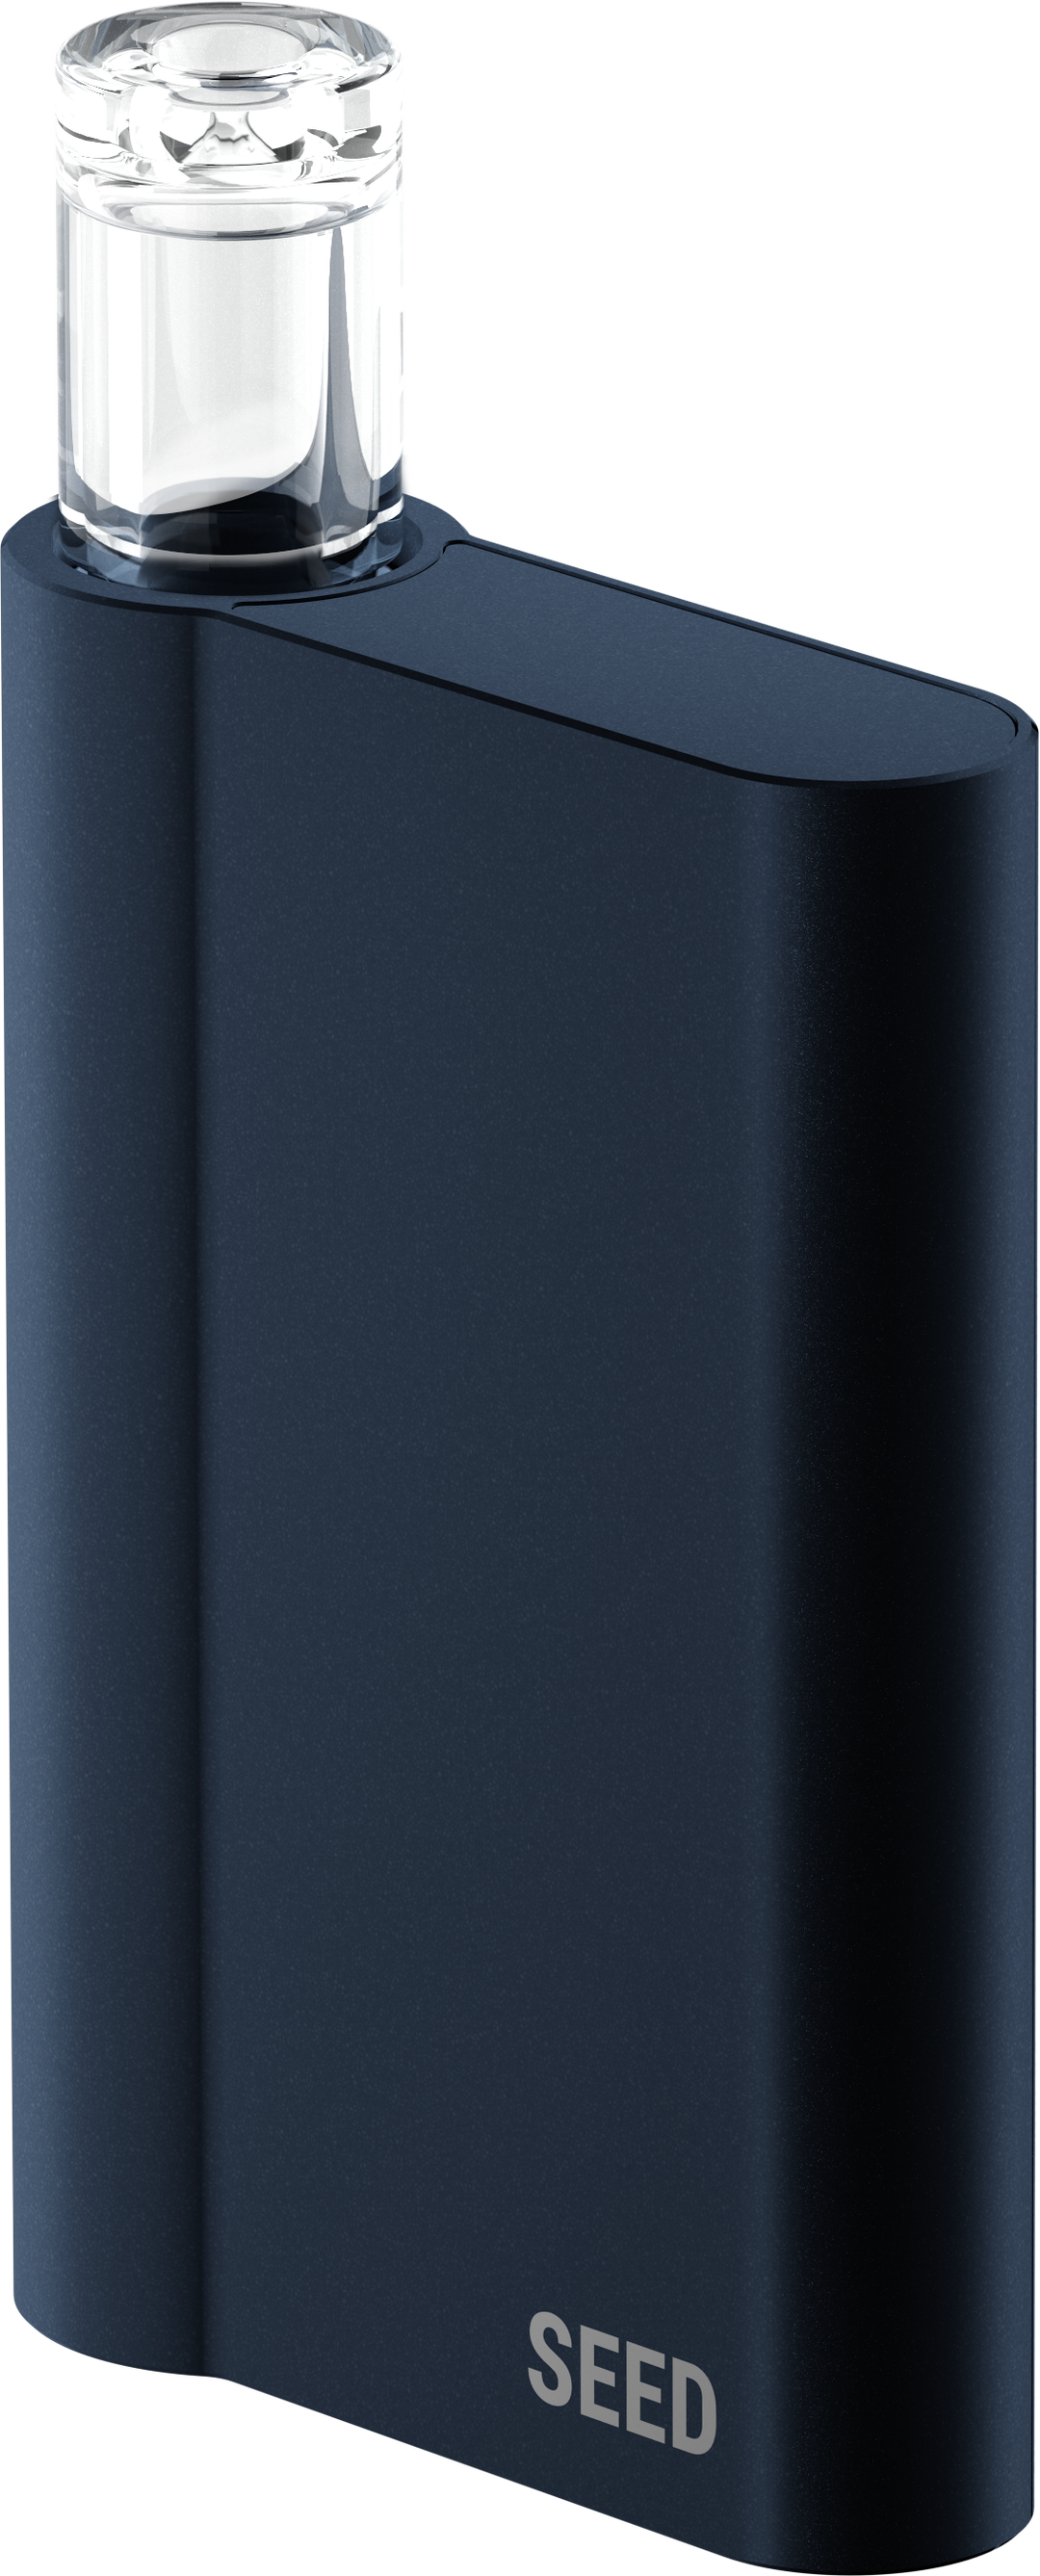 AVD Seed Blue vaporizer battery showcasing its sleek design and blue finish, with a clear display of the magnetic connection and easy-to-use voltage control switch.